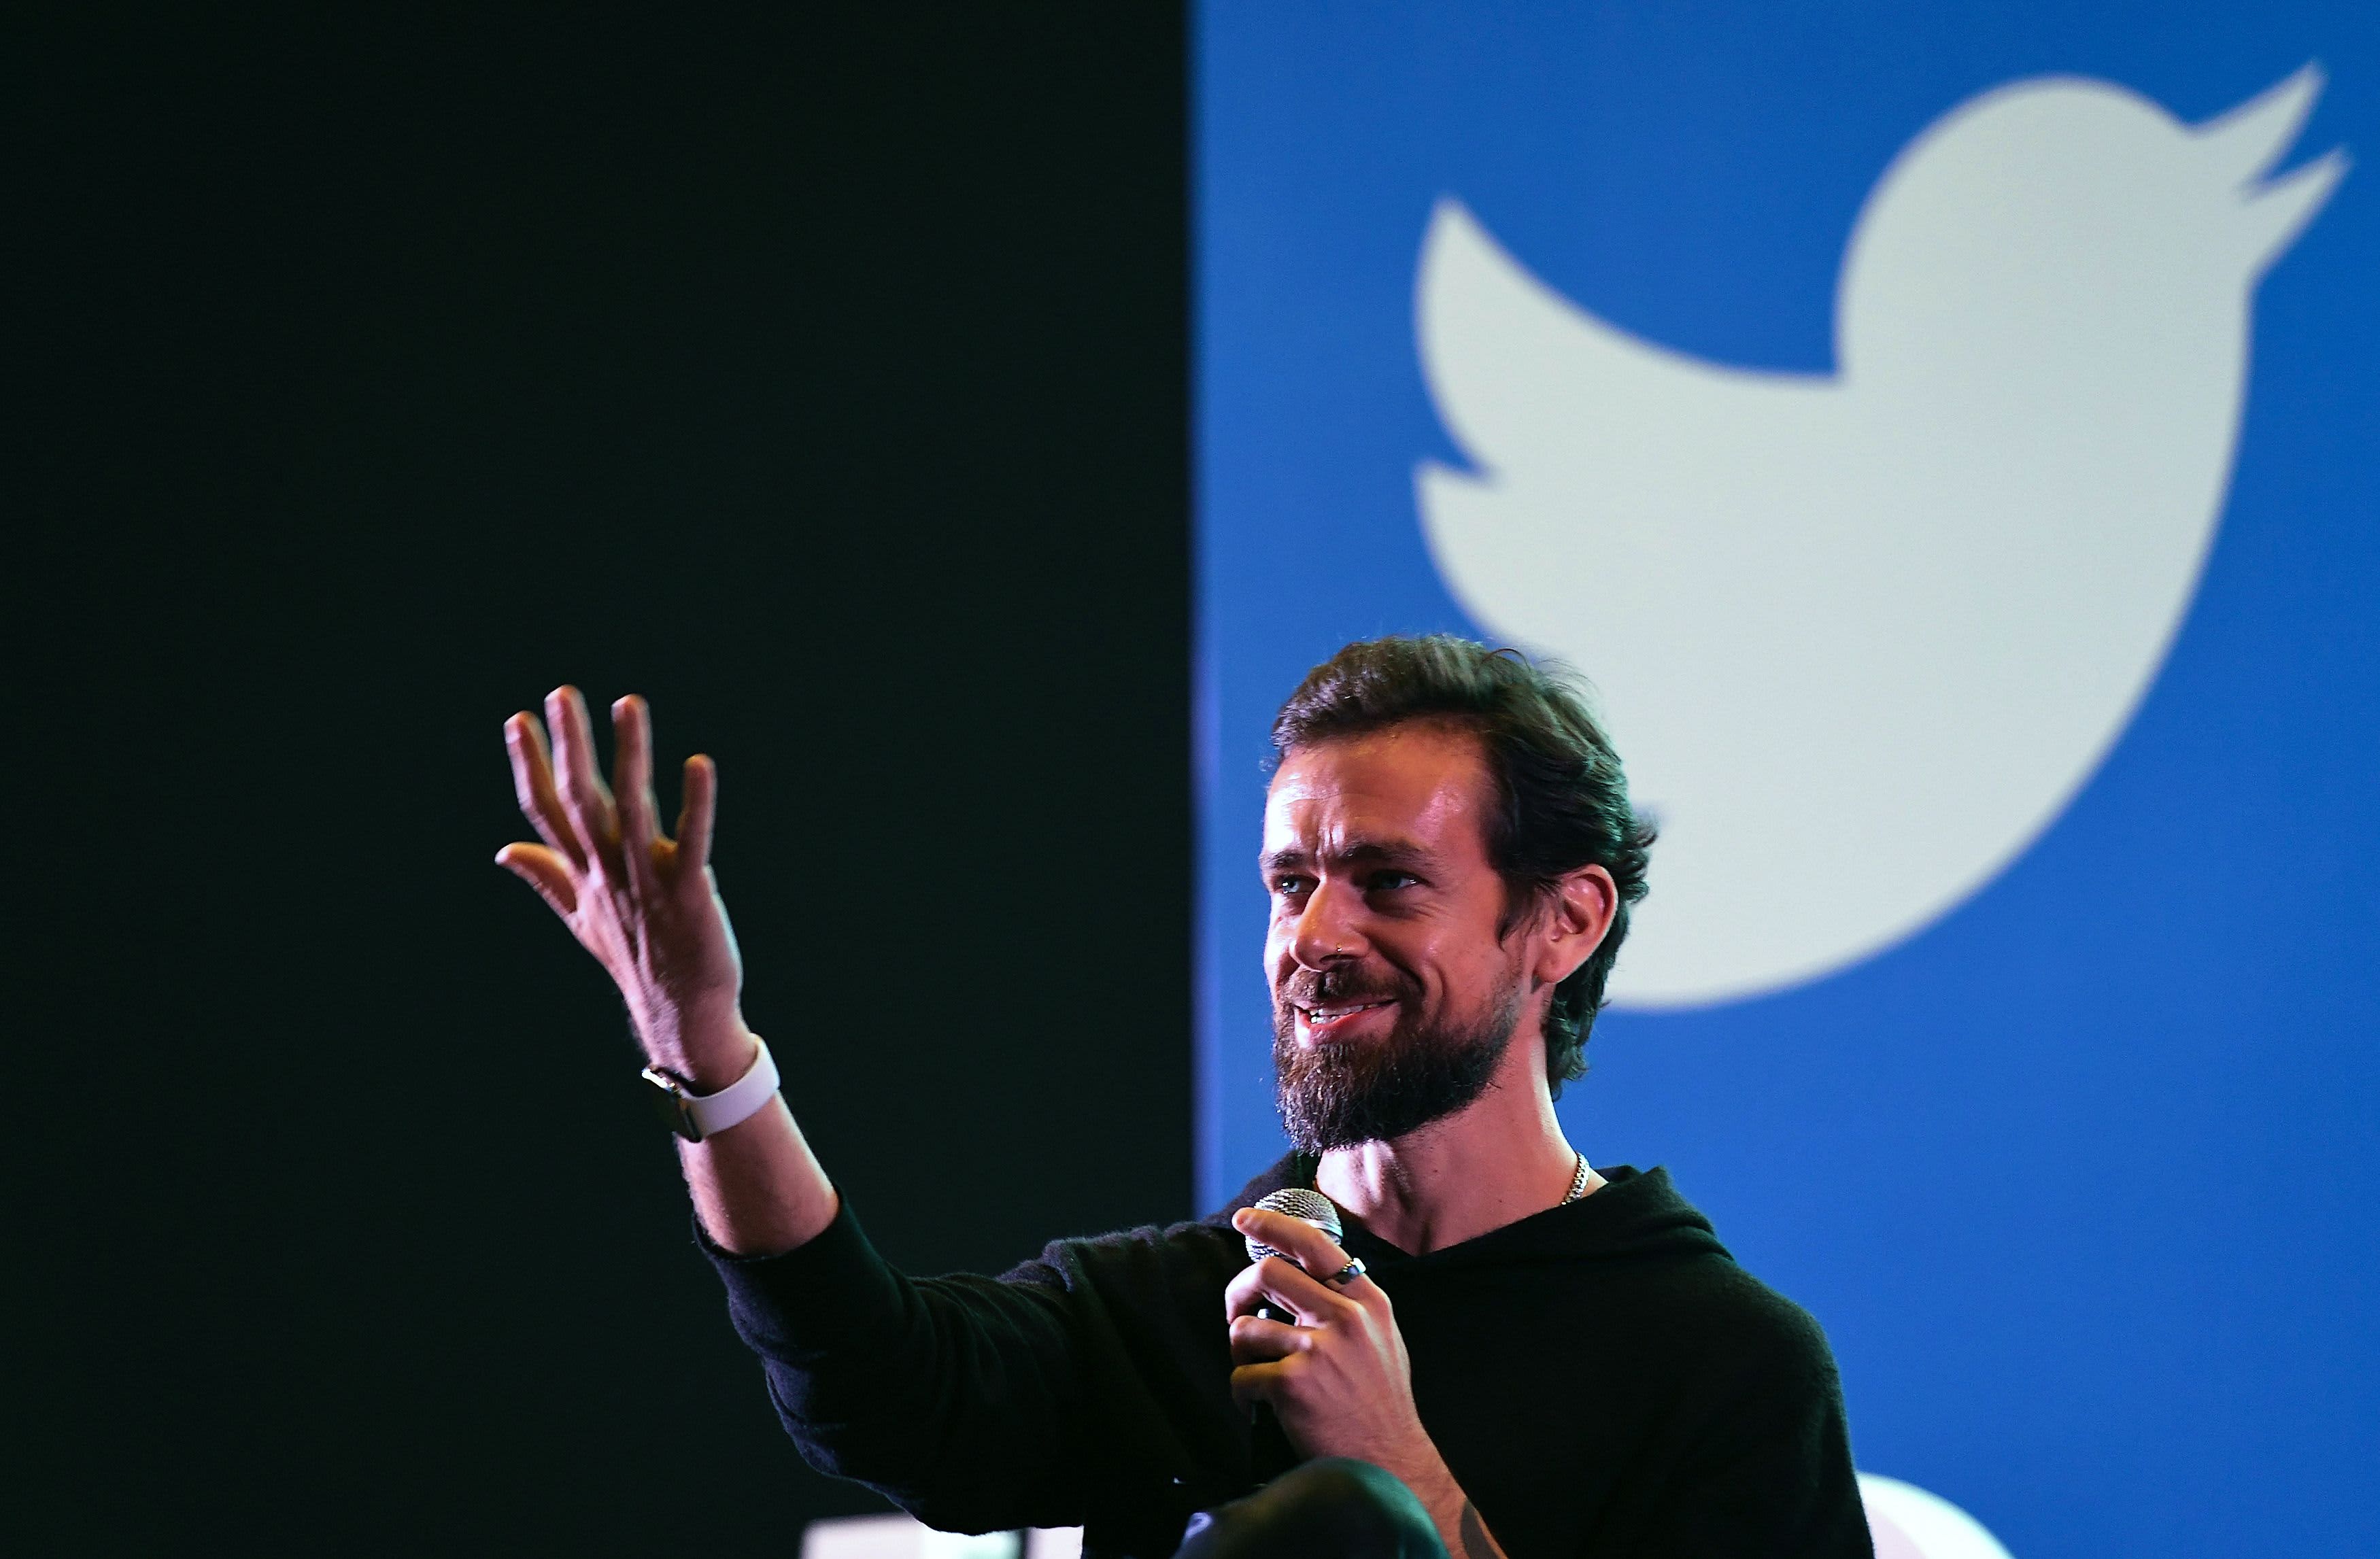 Jack Dorsey offers to sell first tweet as an NFT